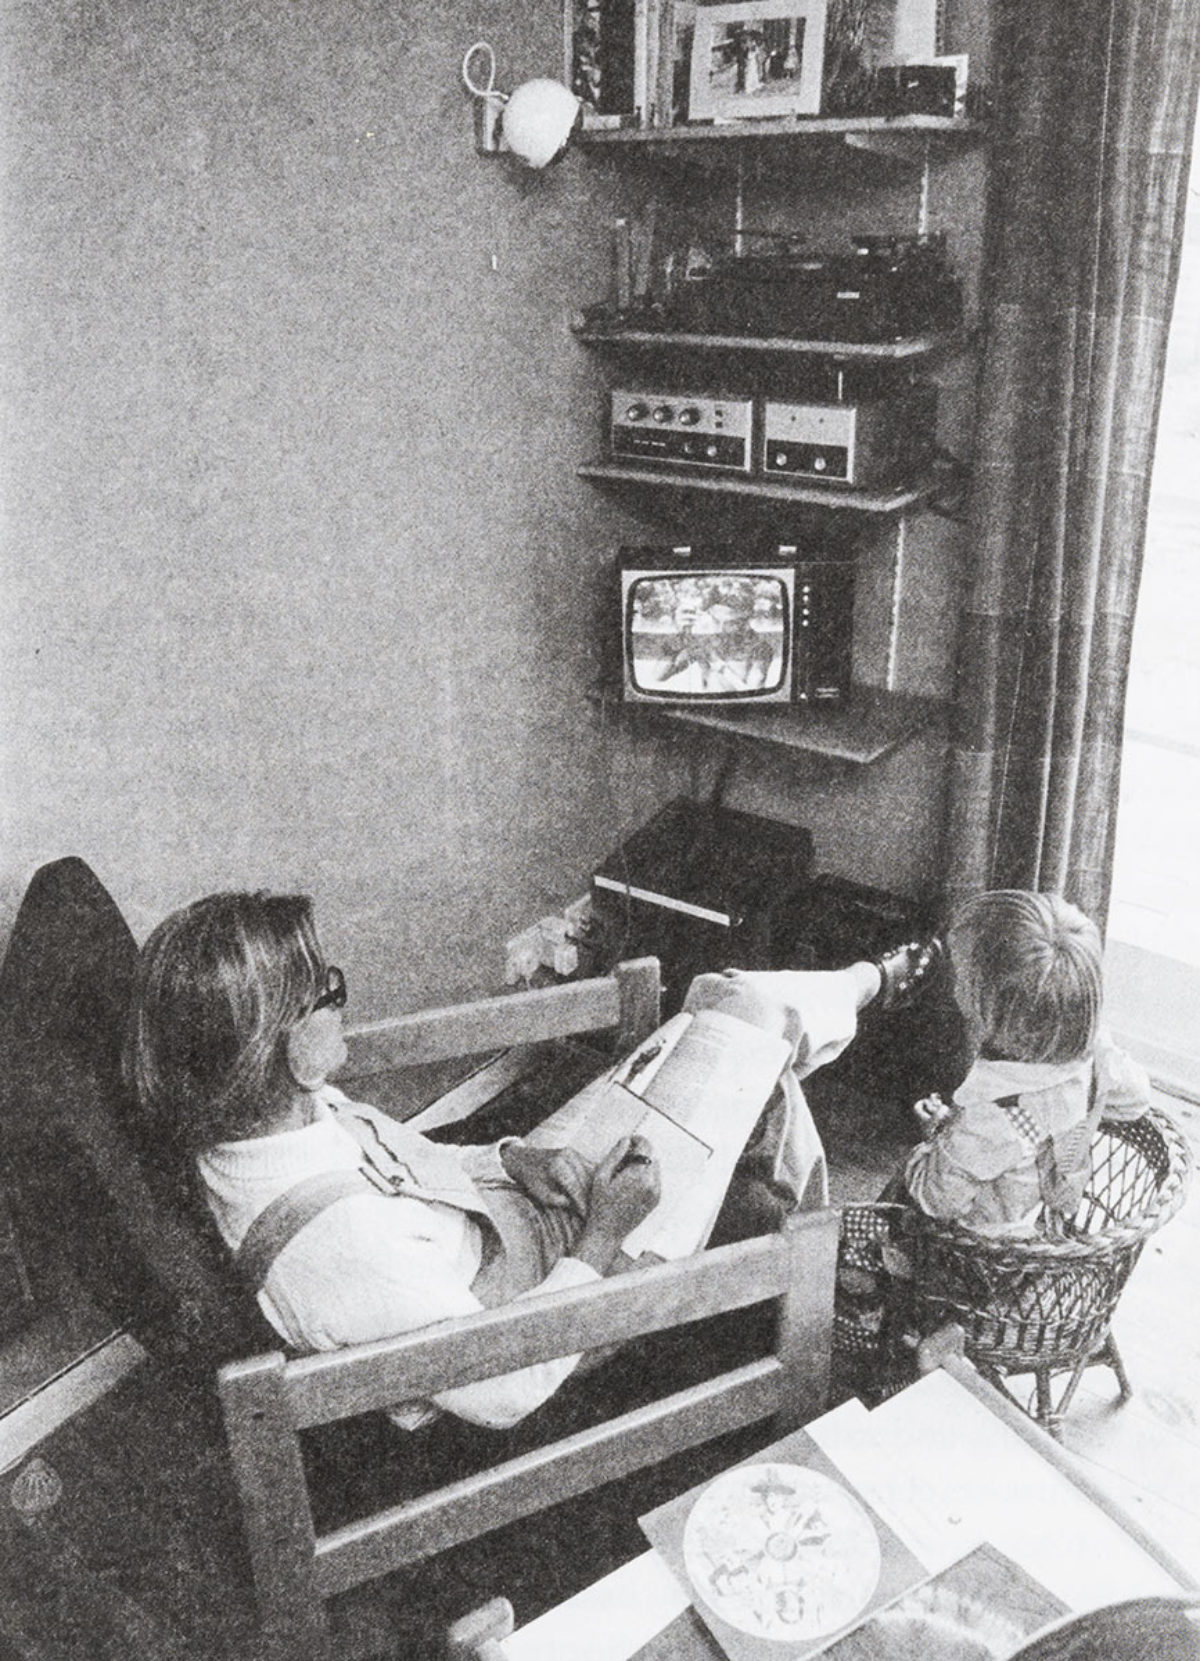 Image of a woman watching Open University course about about Architecture on her tv set.